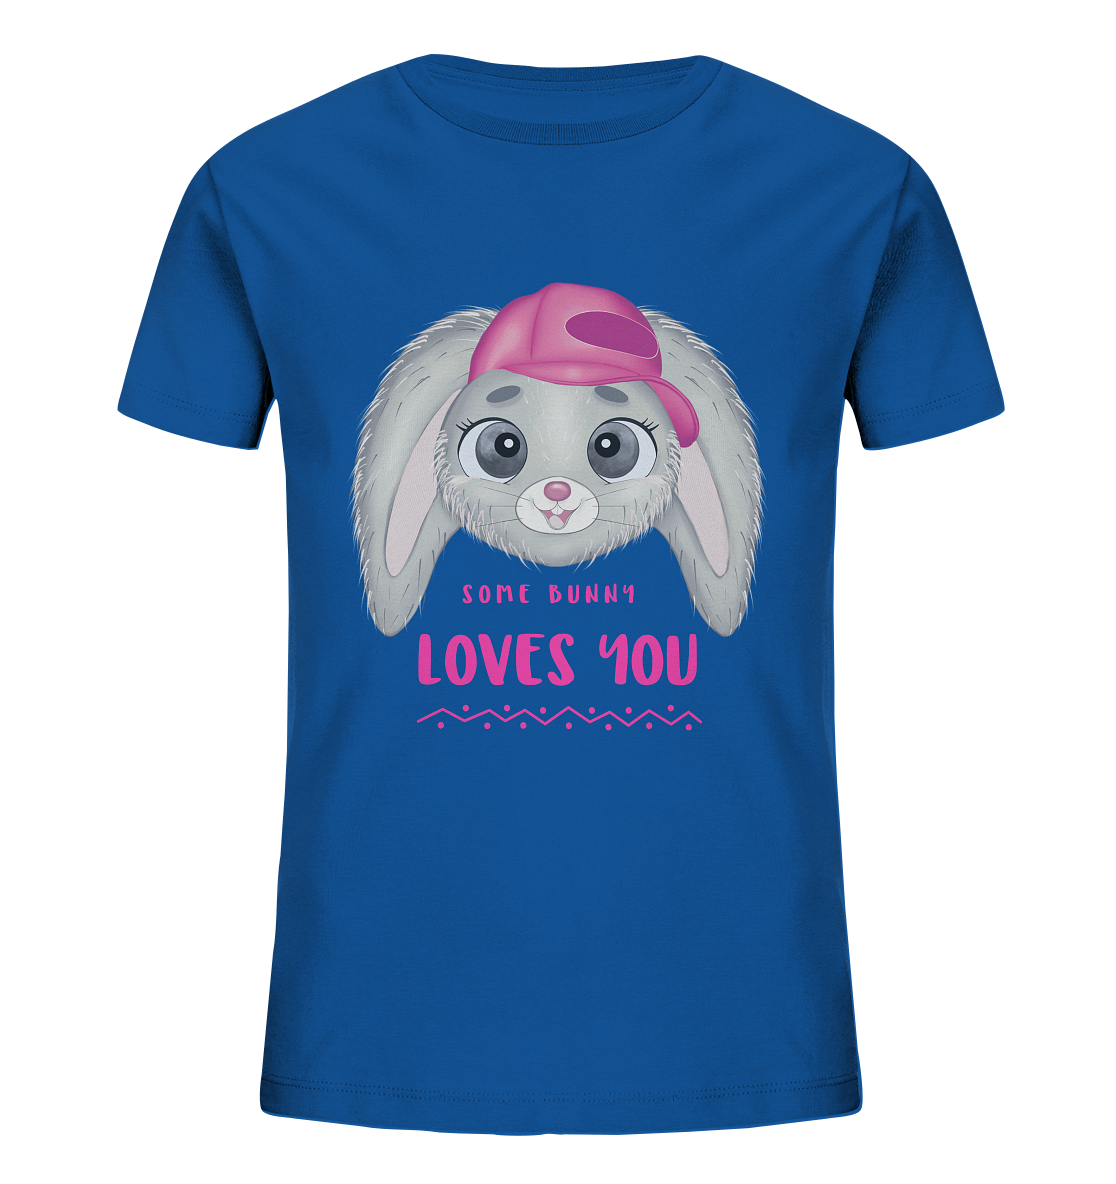 Süßes Cartoon Hase T-Shirt Some Bunny loves you Kinder T-Shirt in royal blau von Bloominic